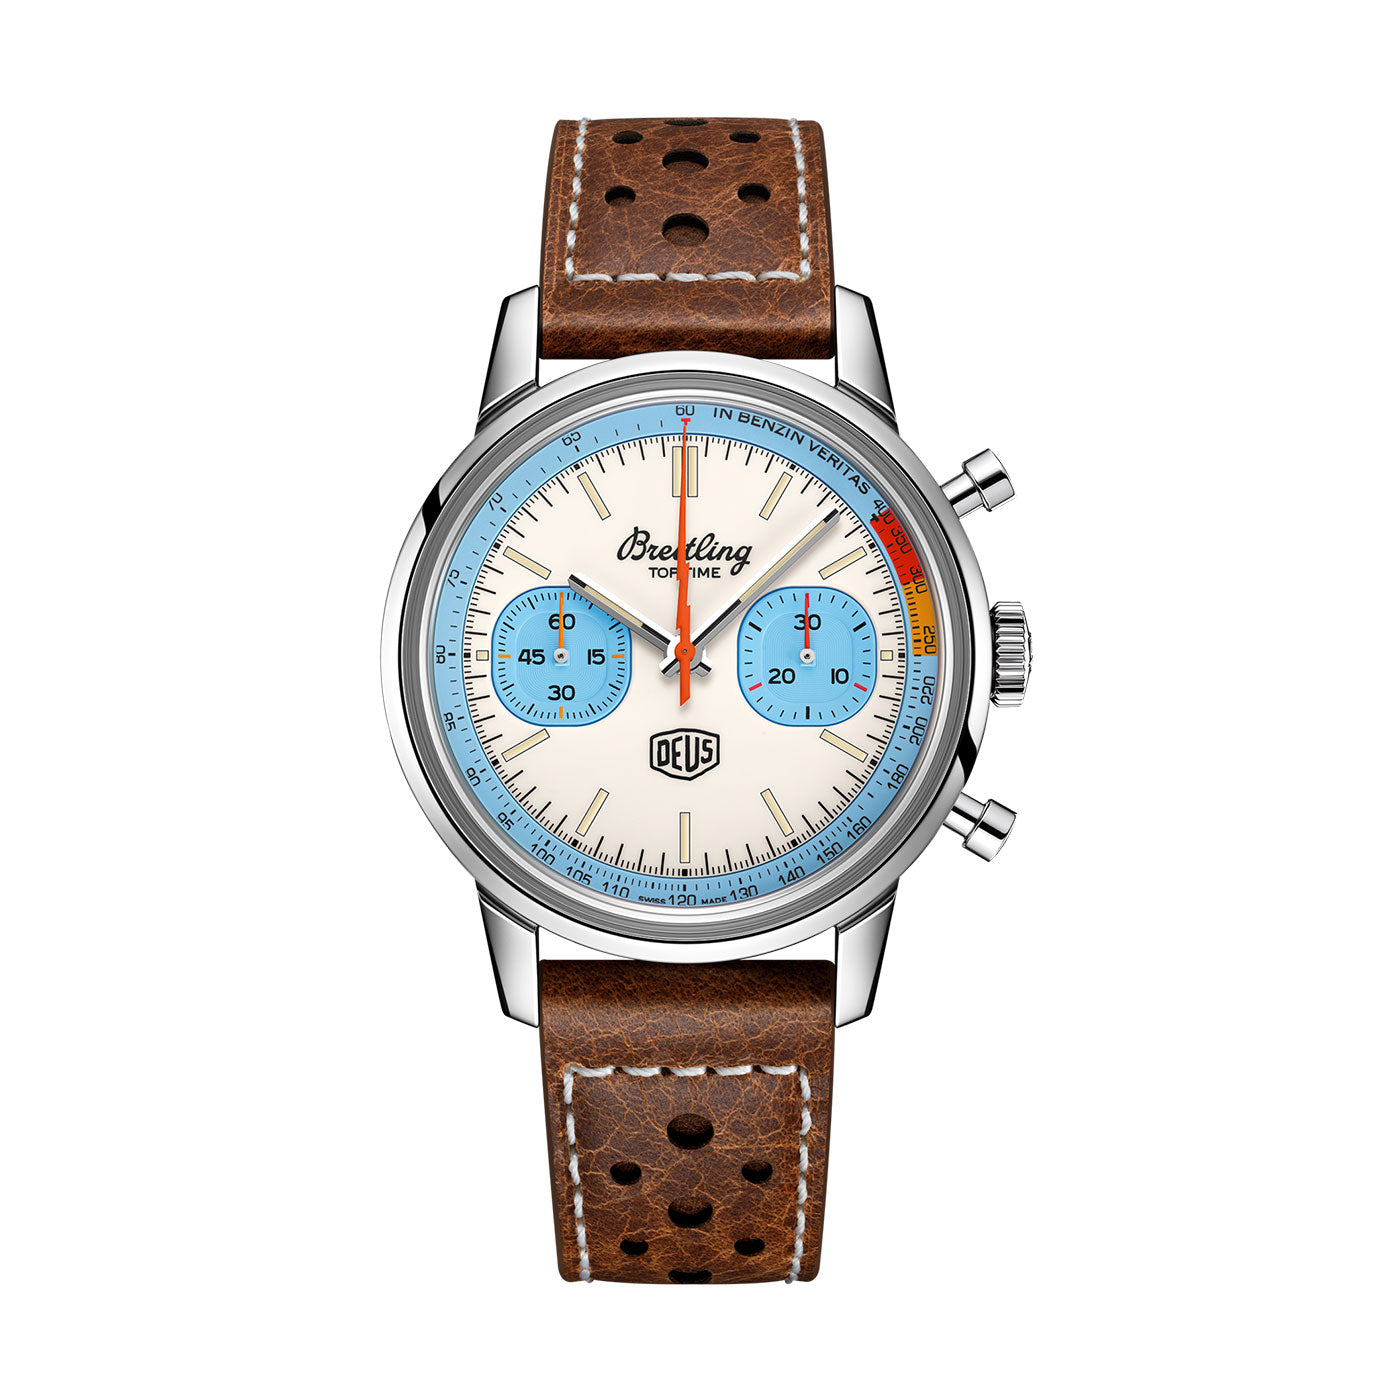 Breitling Top Time Chronograph Triumph Ice Blue Dial - 41 Watch